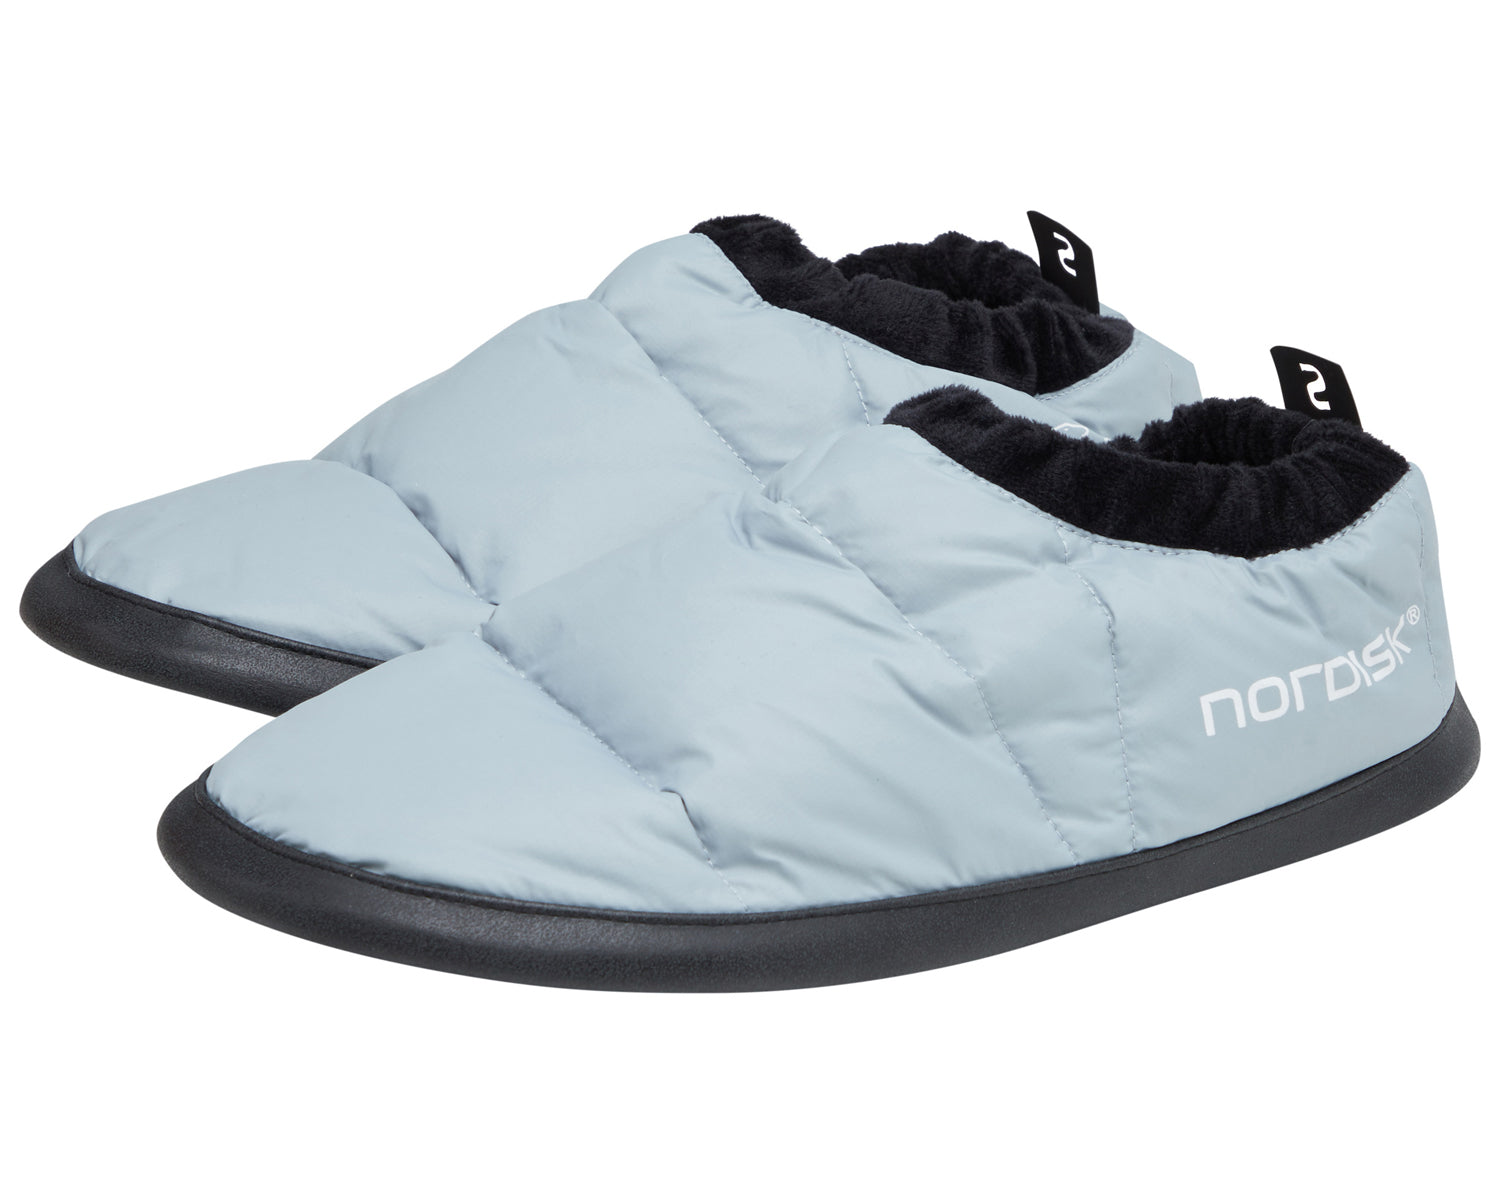 Mos down slippers - Arona Blue